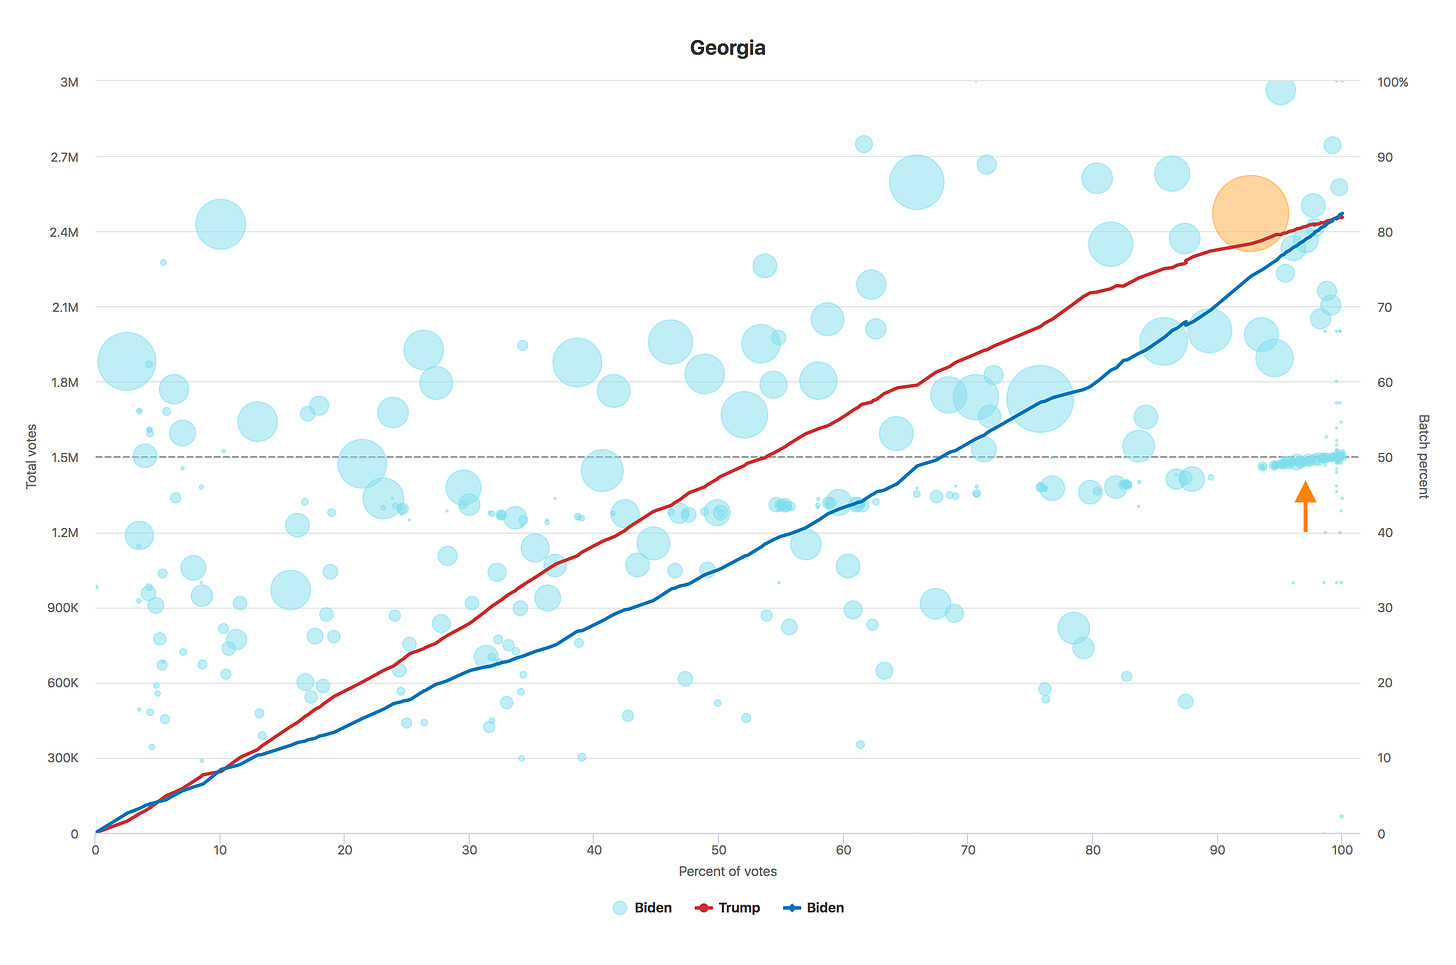 Chart of Georgia voting data over time